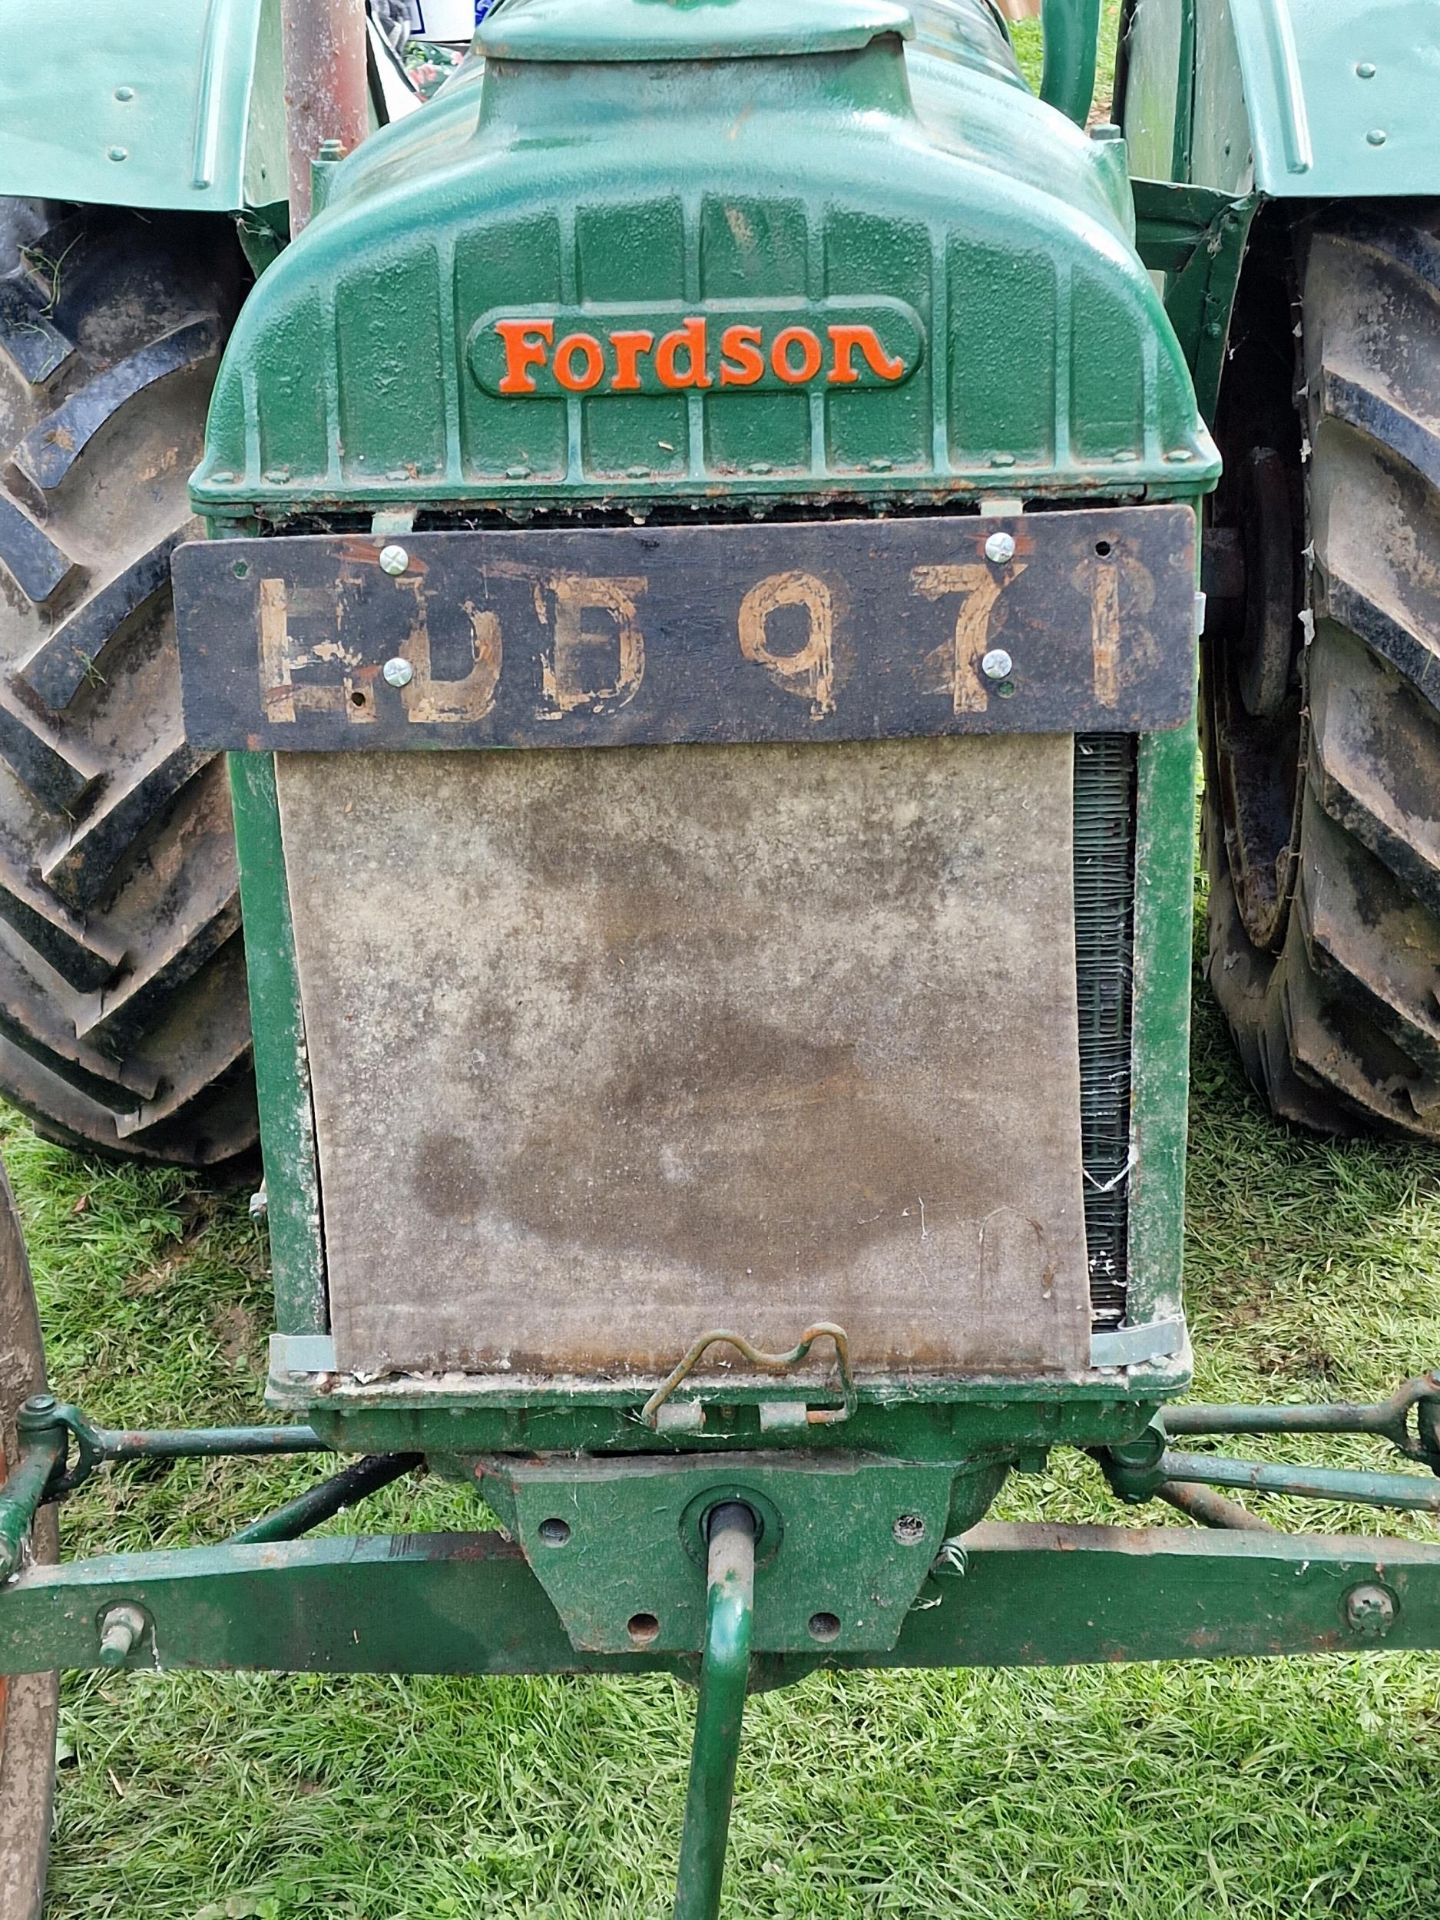 Vintage Fordson Standard green wide wing petrol/TVO powered tractor, starts and drives - Image 2 of 5